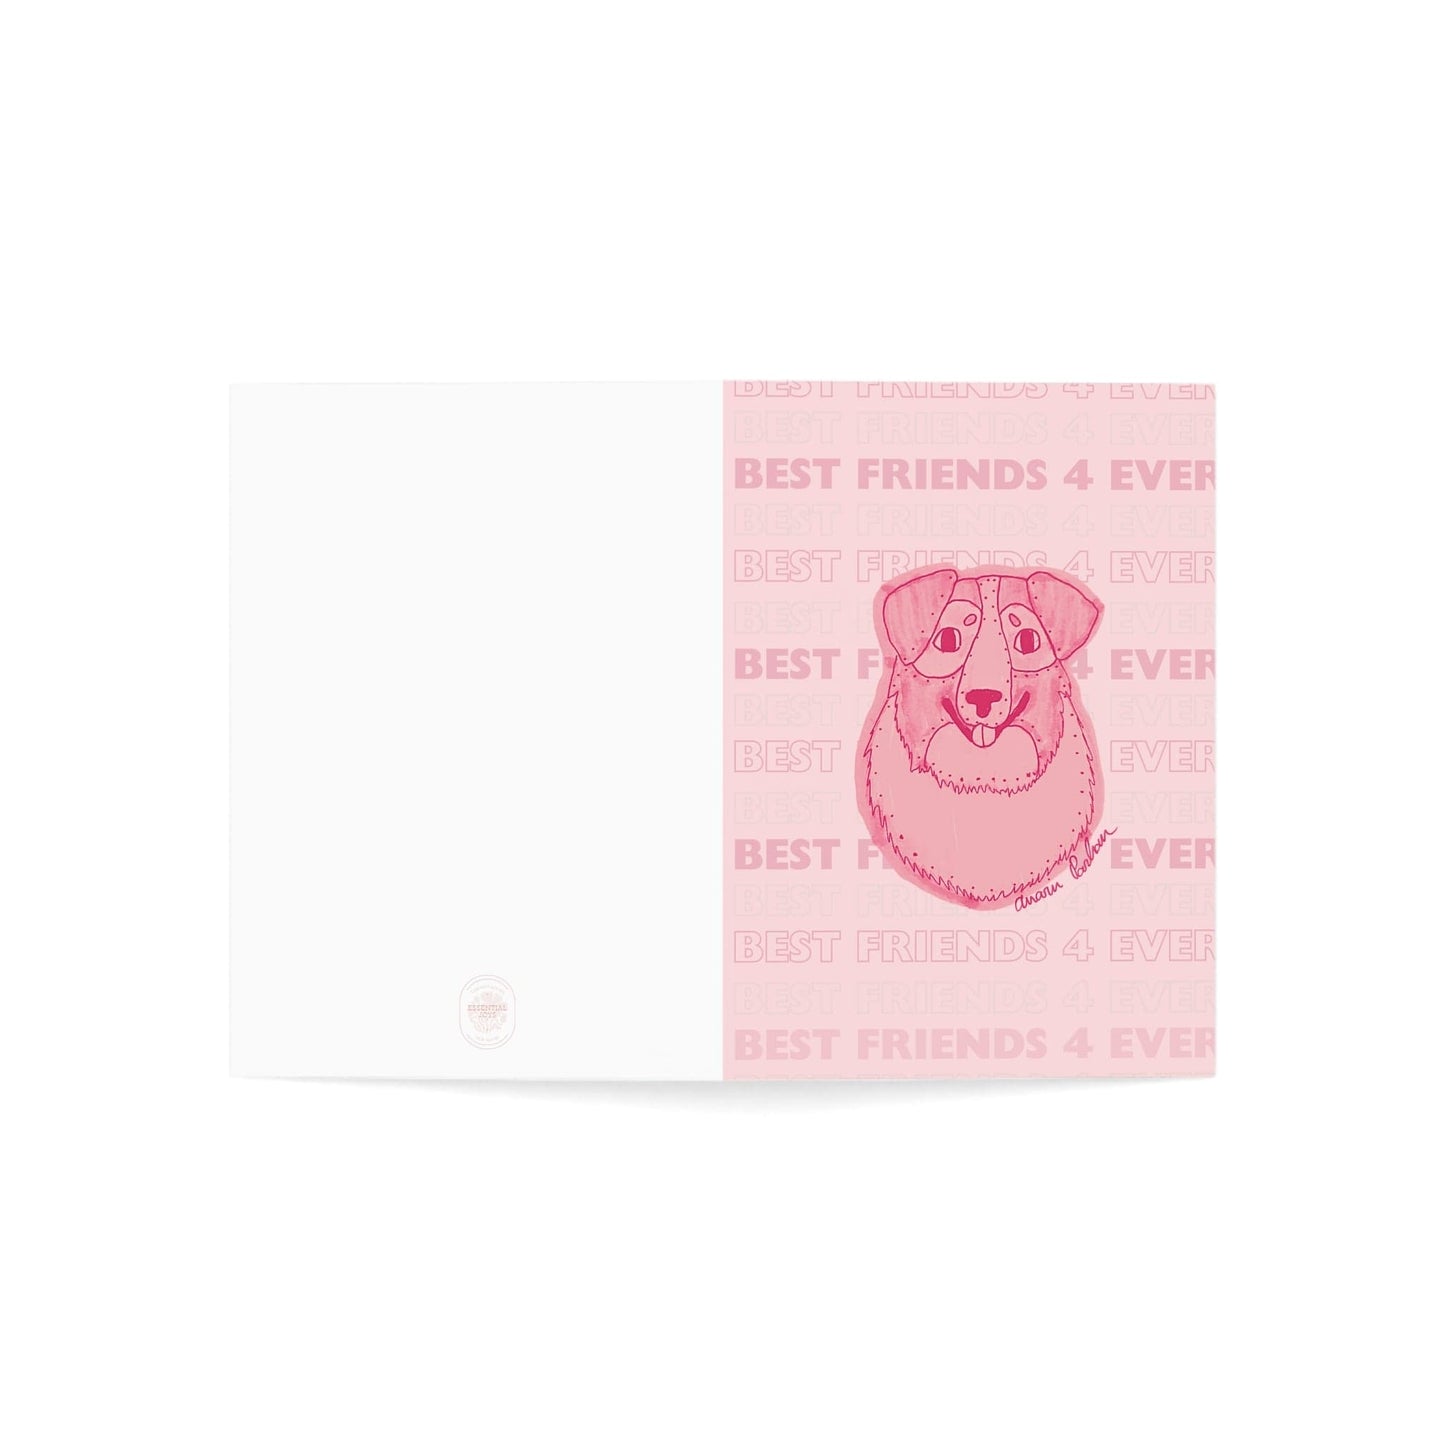 Scales + Tails Art Paper products 3.5" x 4.9" (Vertical) / Coated (both sides) / 1 pc Best Friends 4 Ever Greeting Card | Scales + Tails Art